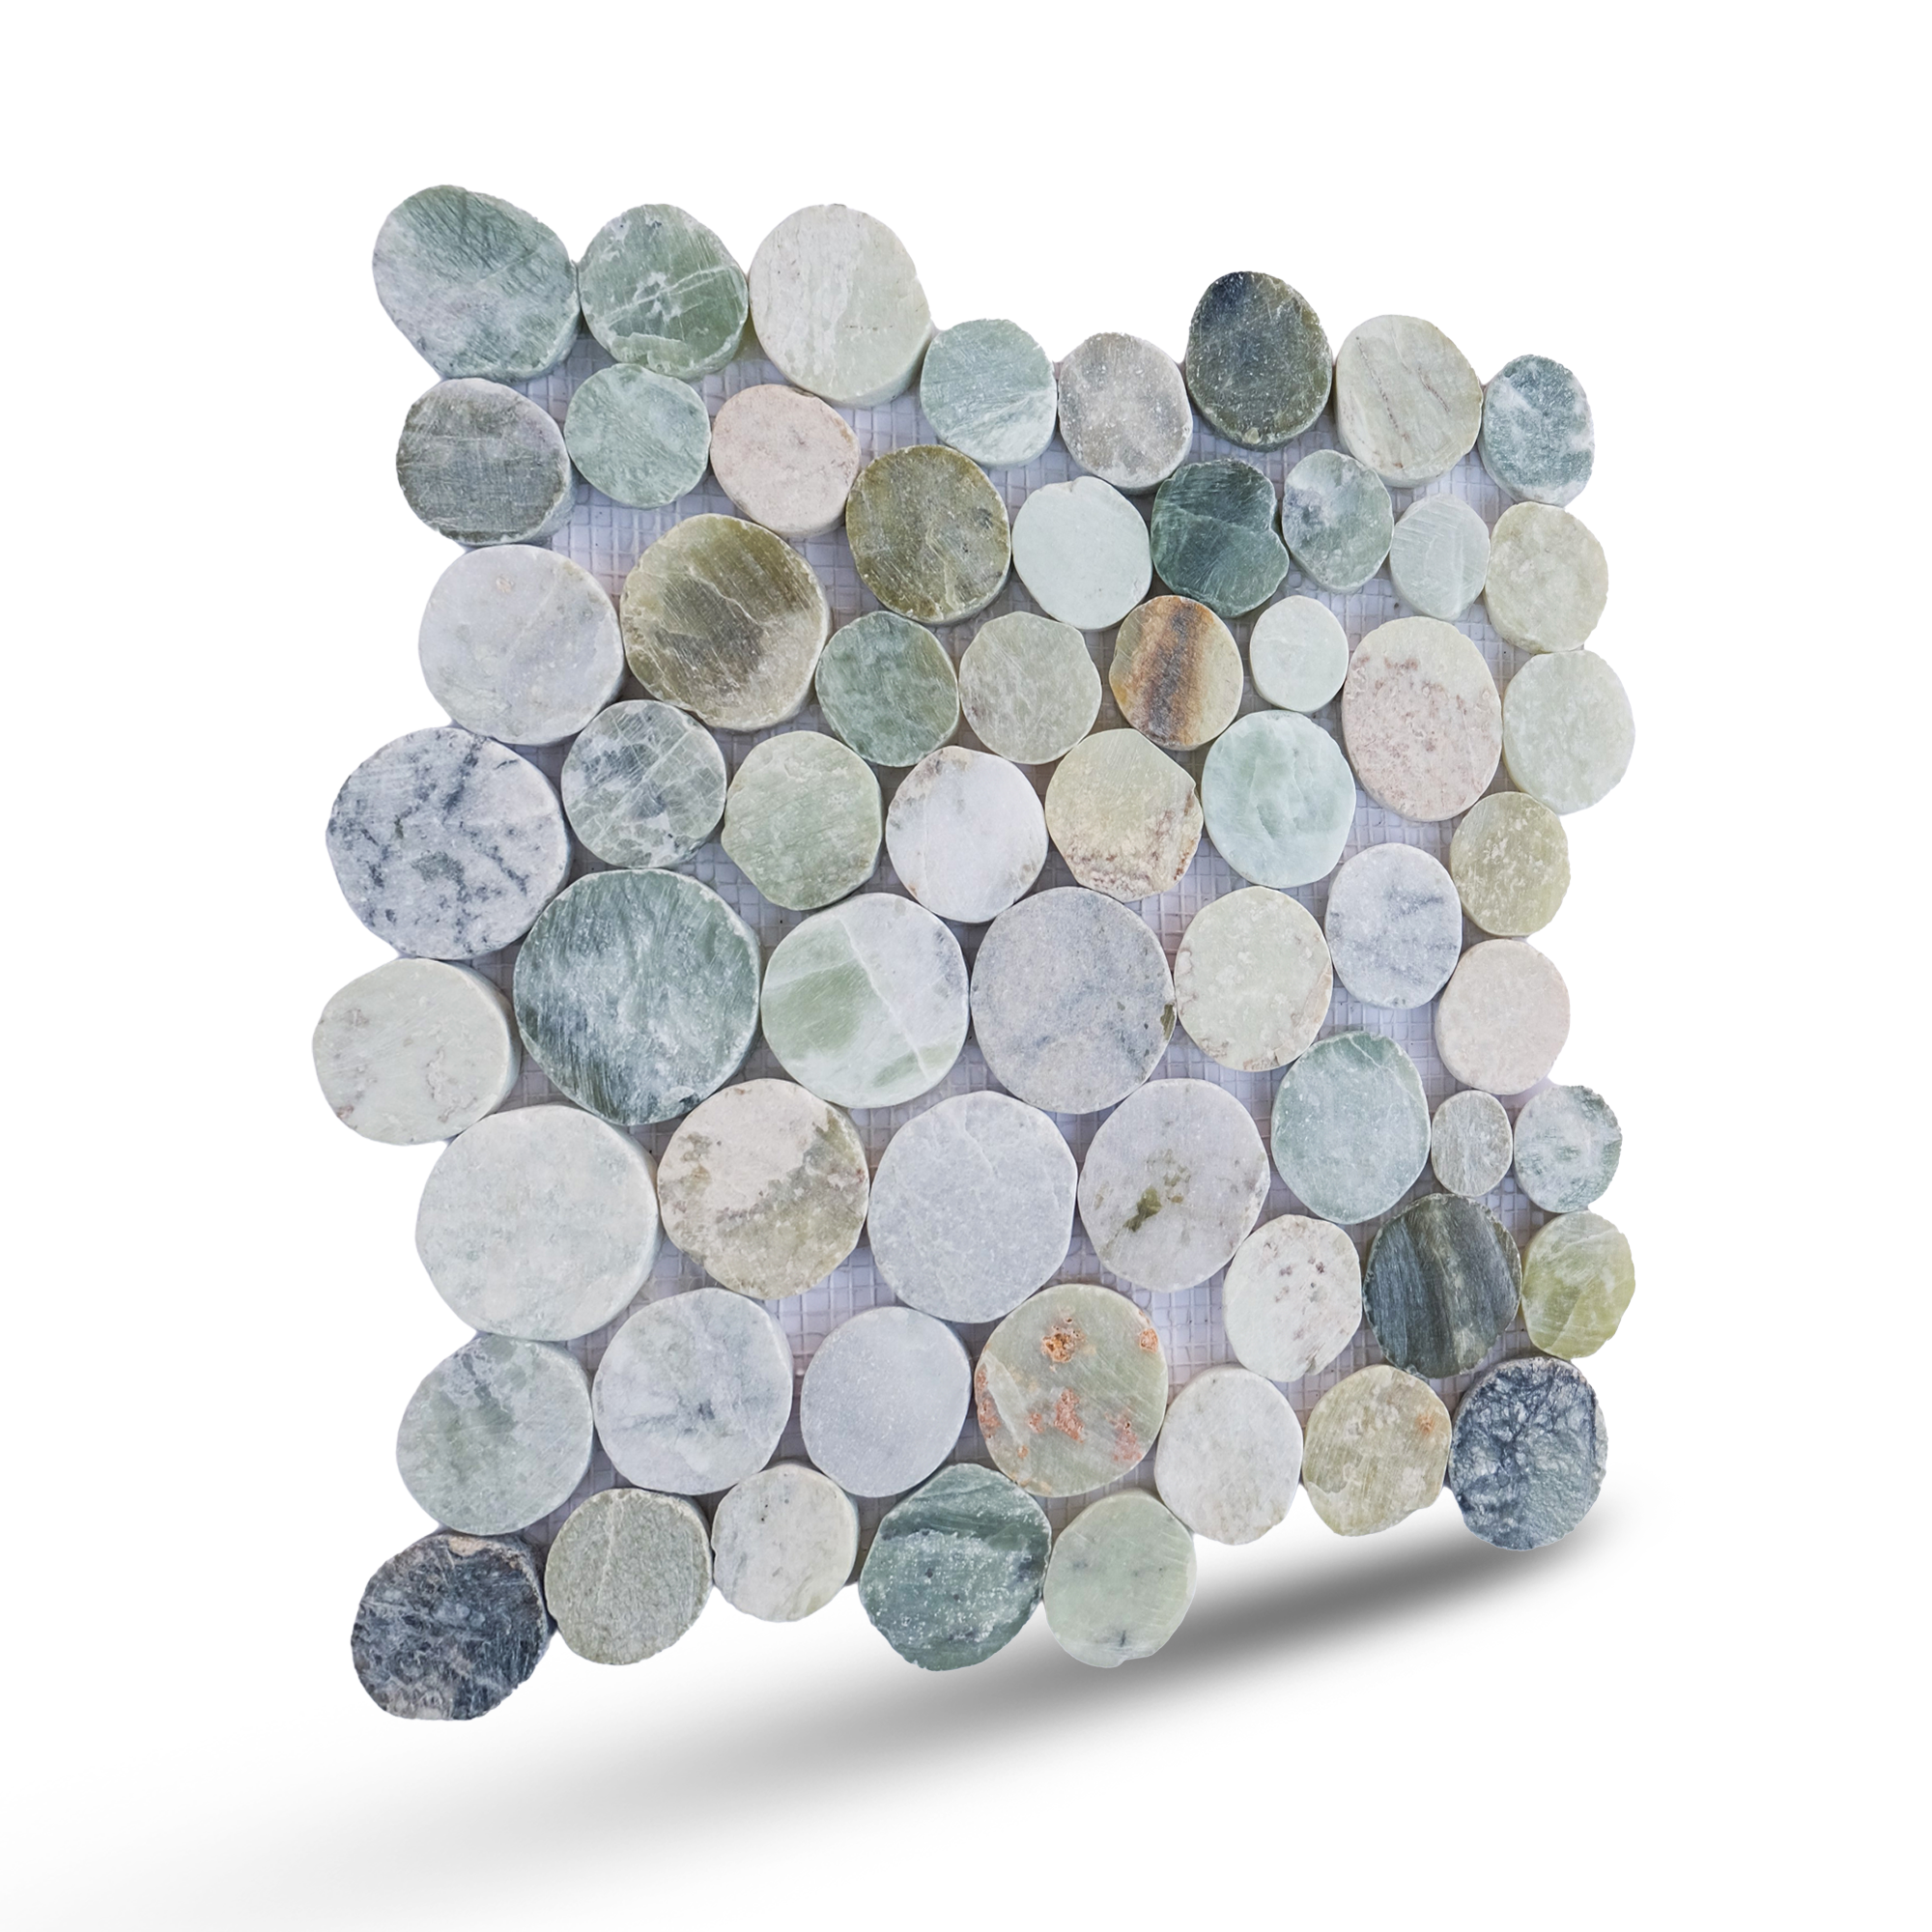 Sea Green Penny Round Tile, Marble Mosaic Wall & Floor Tile